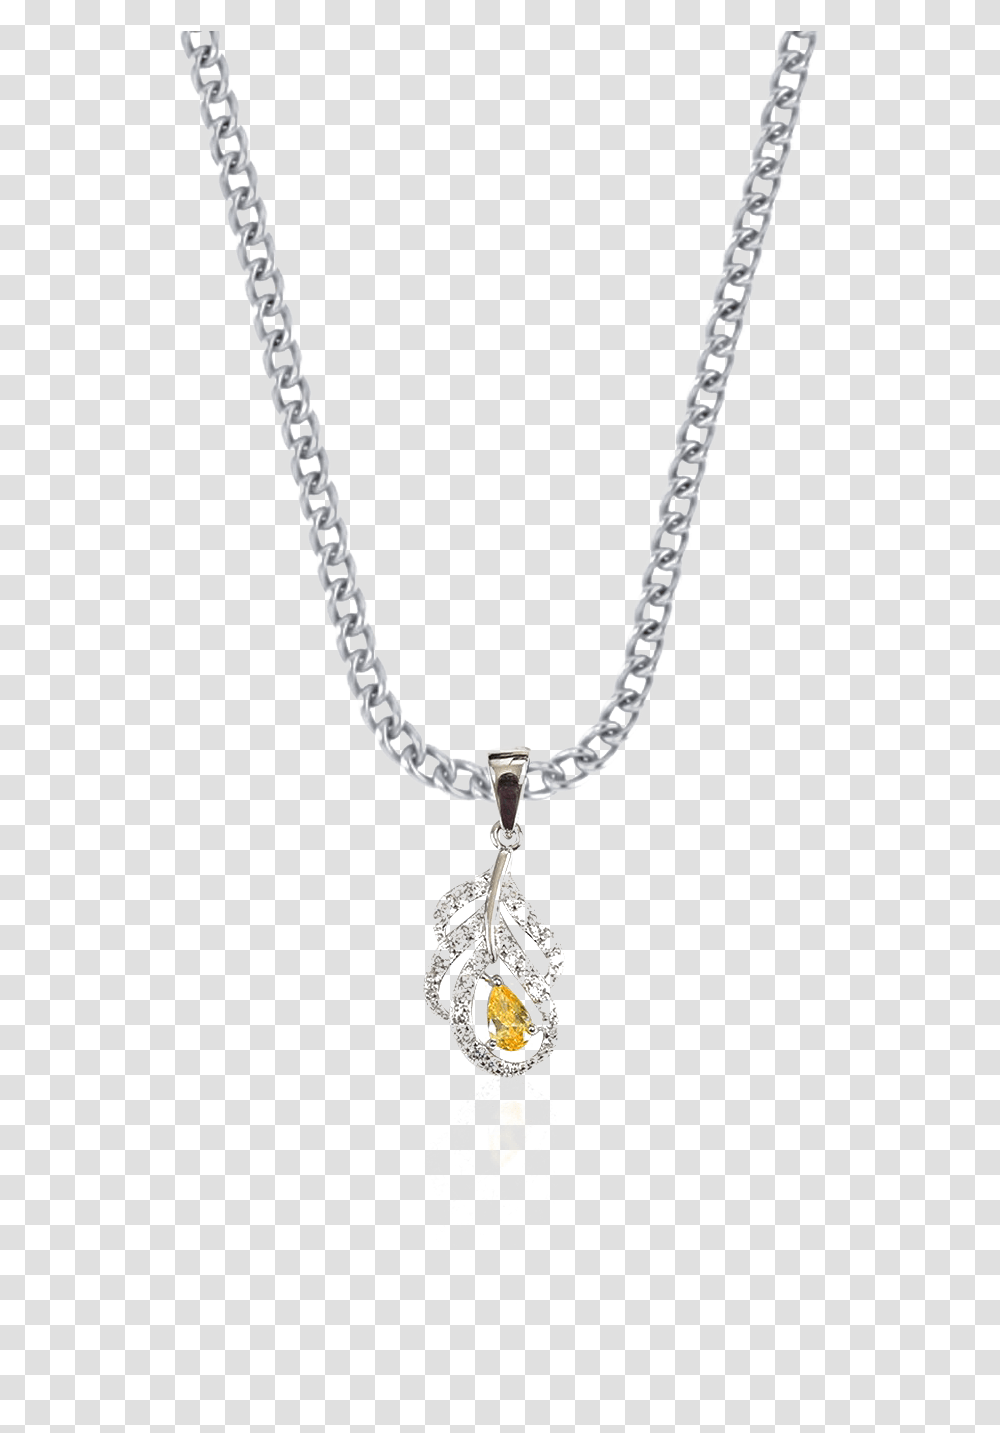 Silver Pendant, Necklace, Jewelry, Accessories, Accessory Transparent Png